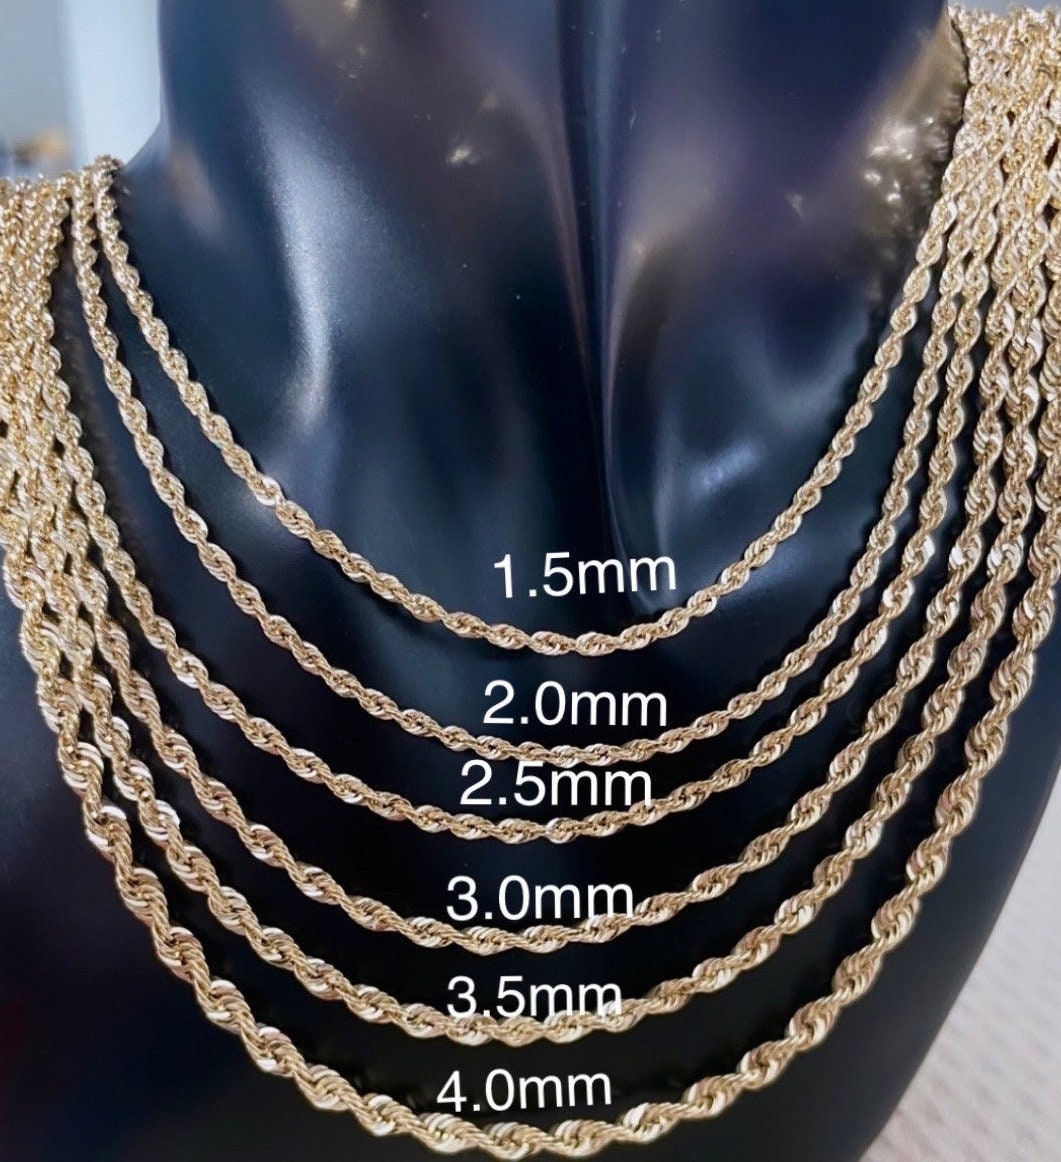 SOLID 18K YELLOW GOLD 33 GRAM TWISTED ROPE CHAIN 3.2mm 30in MENS LADIES  NECKLACE